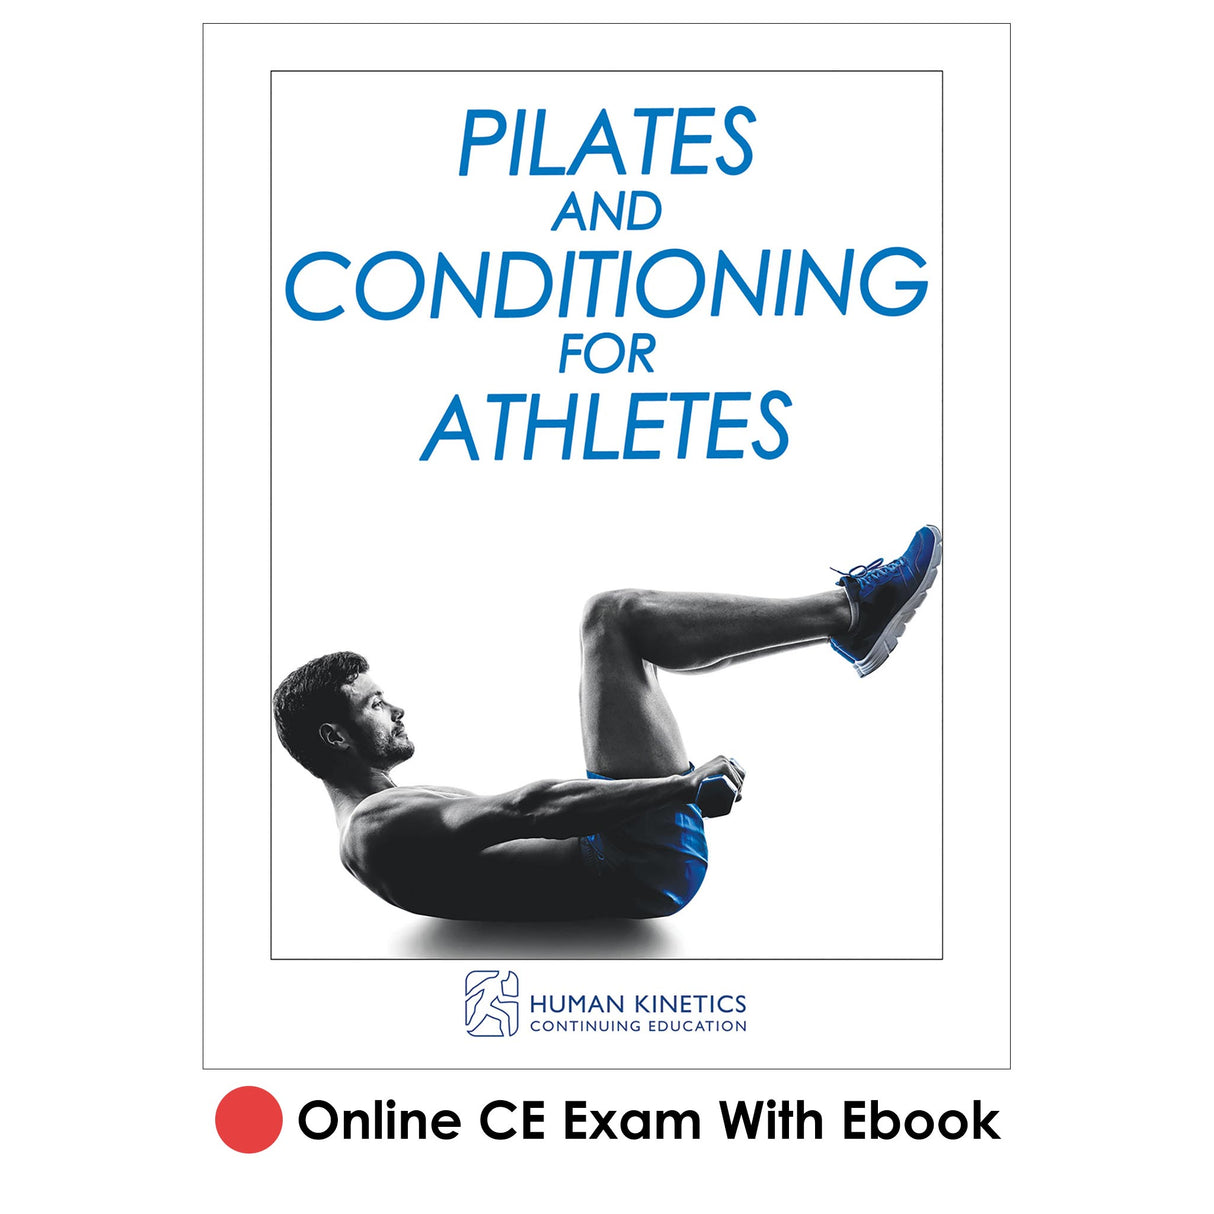 Pilates and Conditioning for Athletes Online CE Exam With Ebook